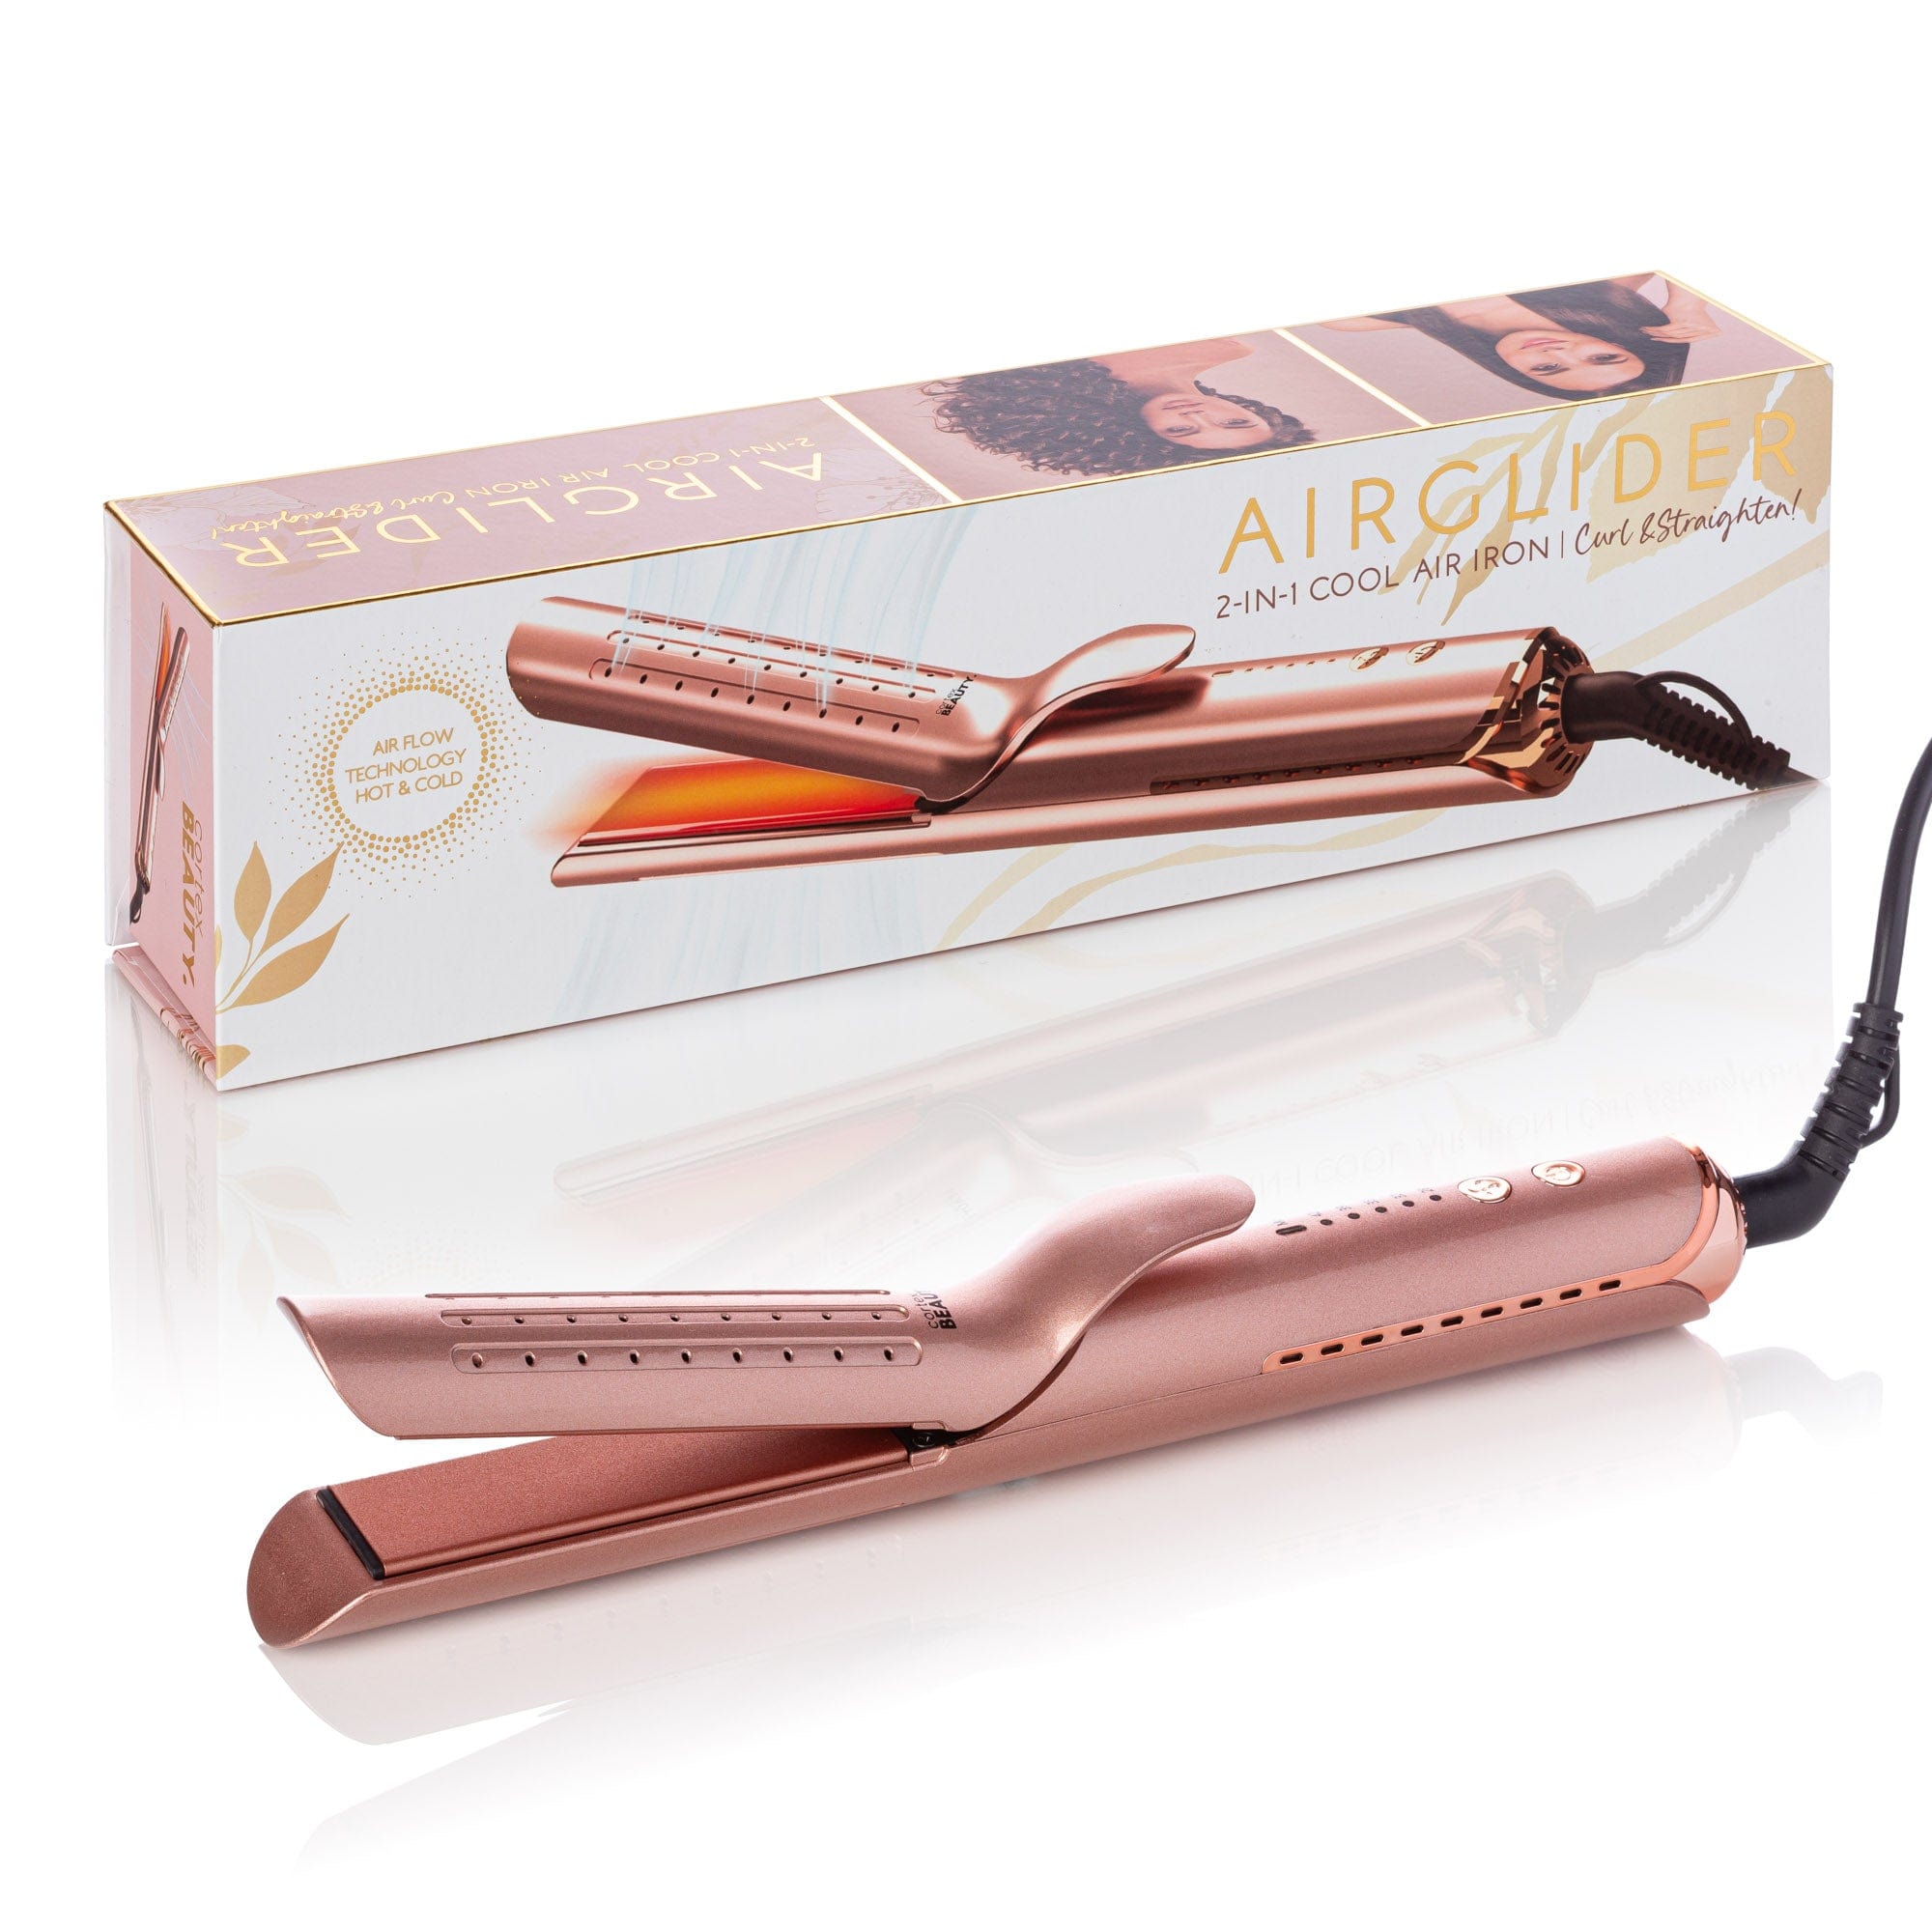 Cortex Beauty AirGlider | 2-in-1 Cool Air Flat Iron/curler